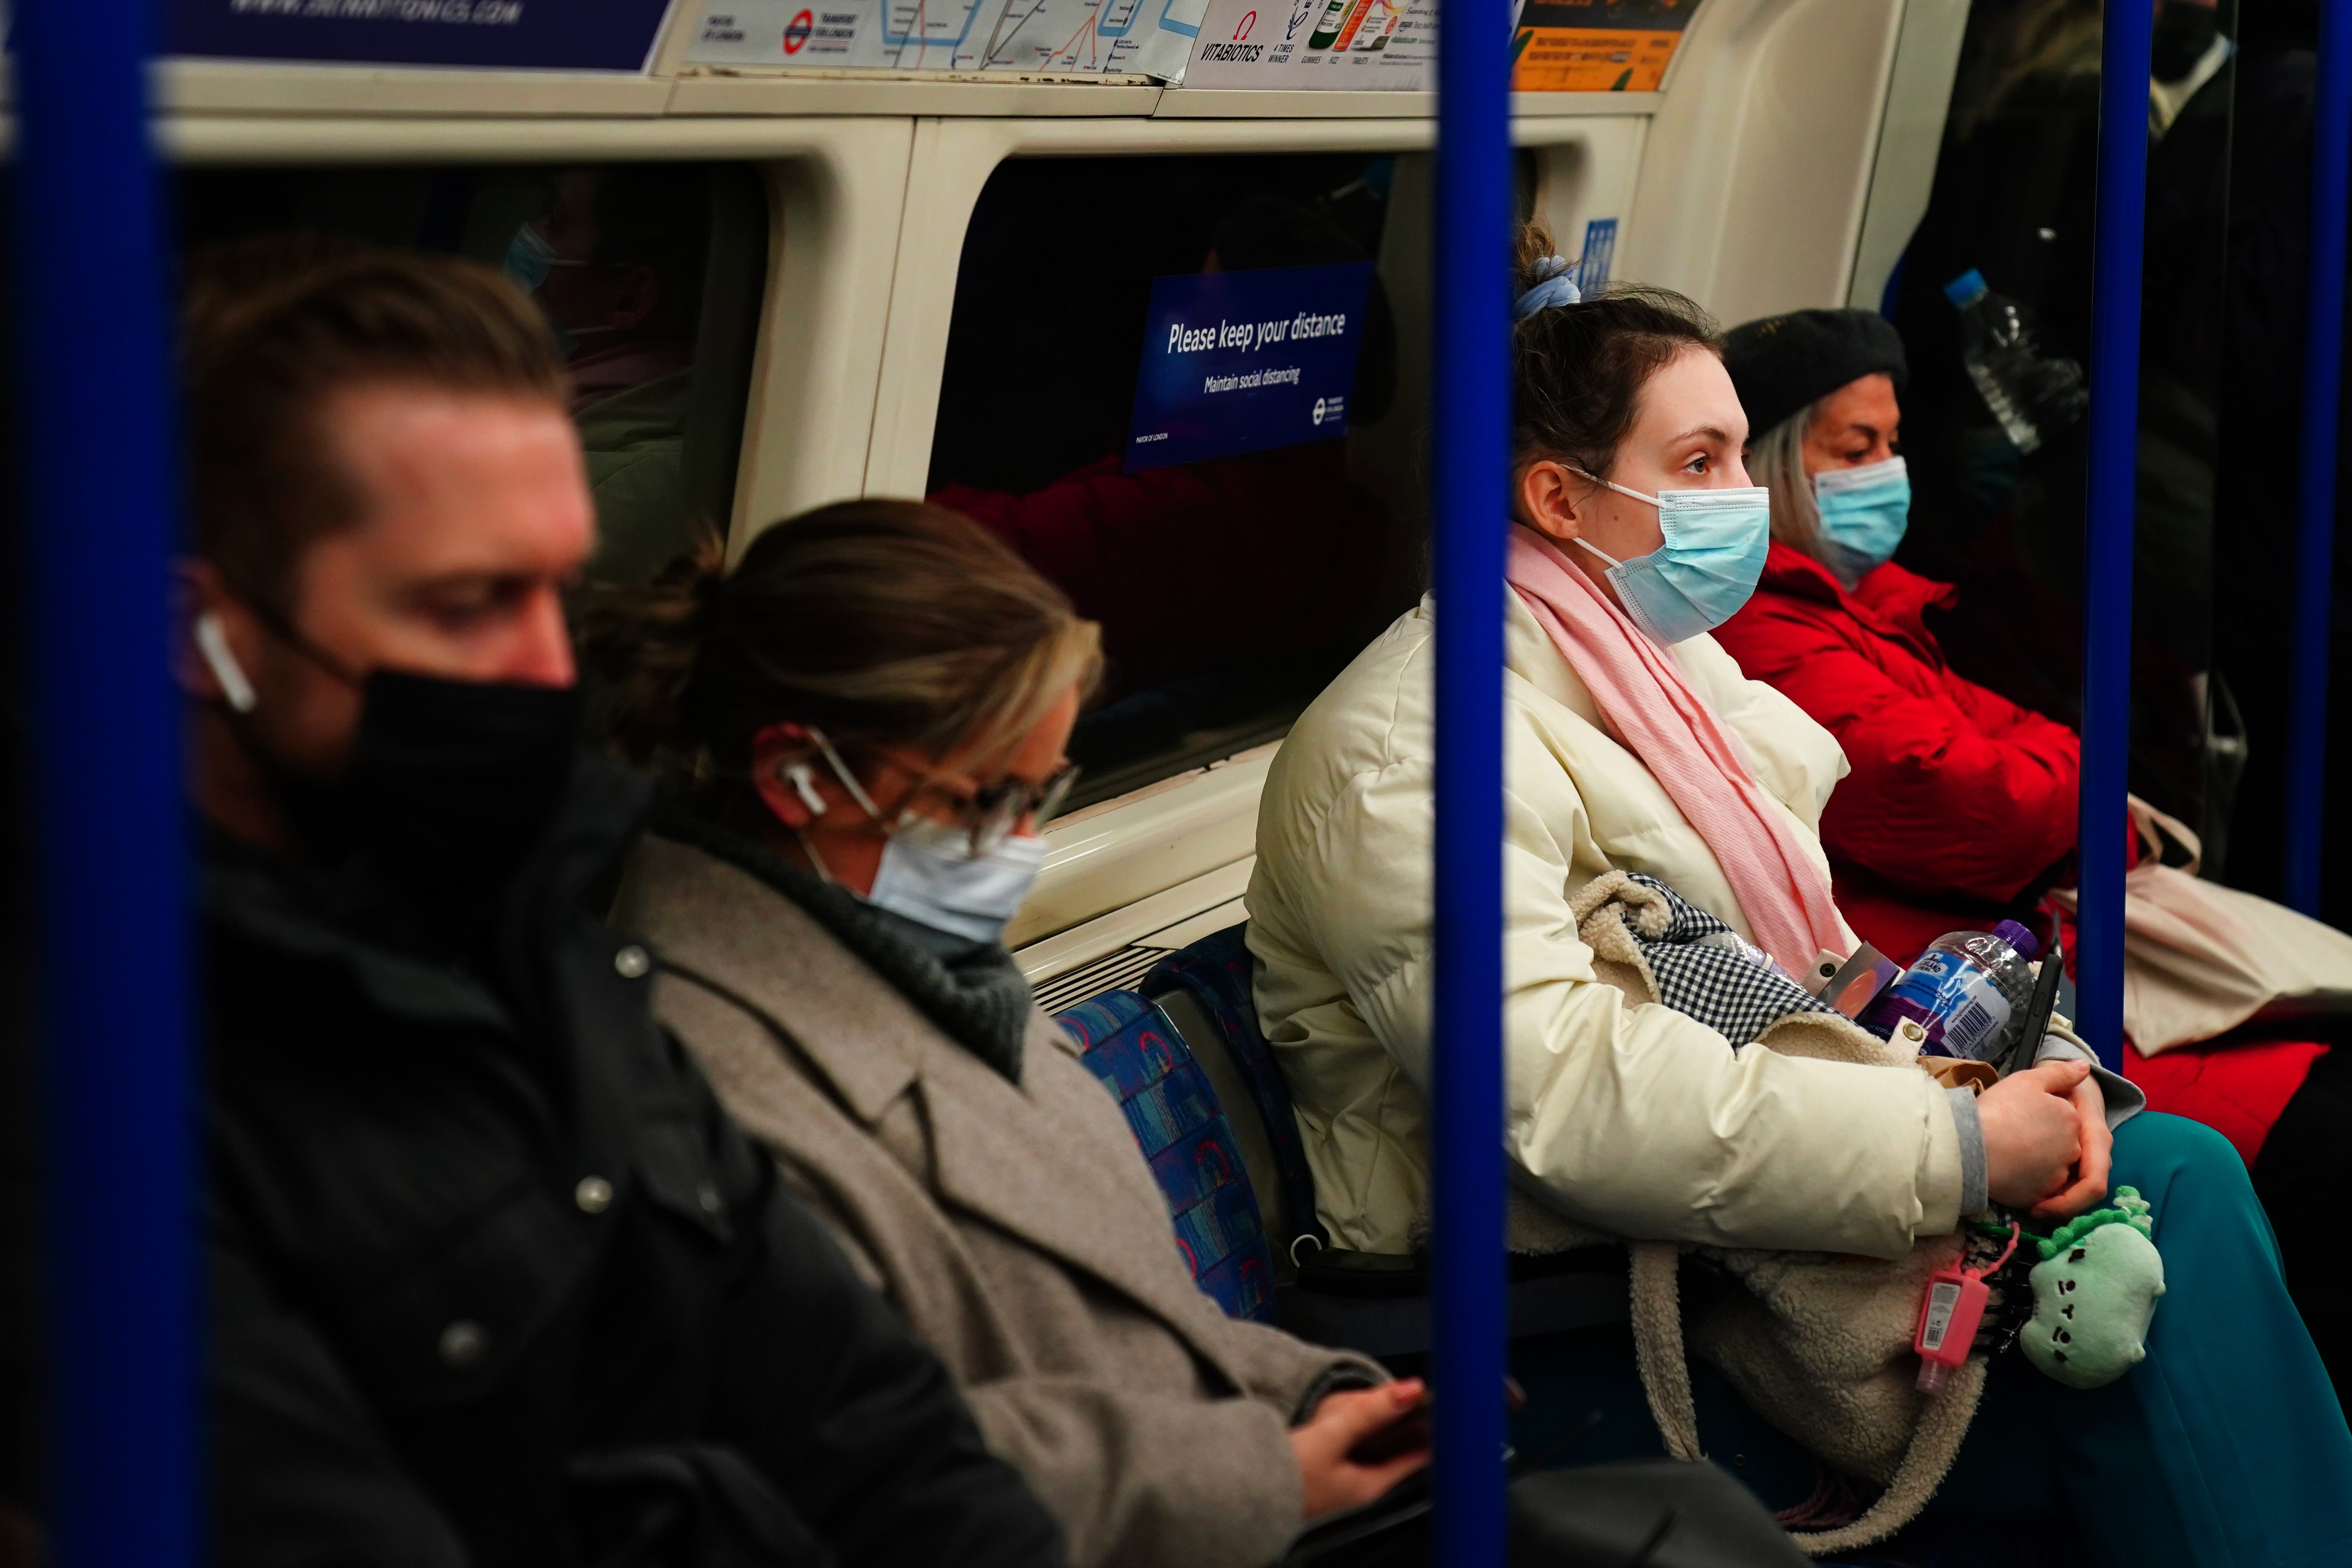 There’s been a call for masks on public transport – but was it an expert one?